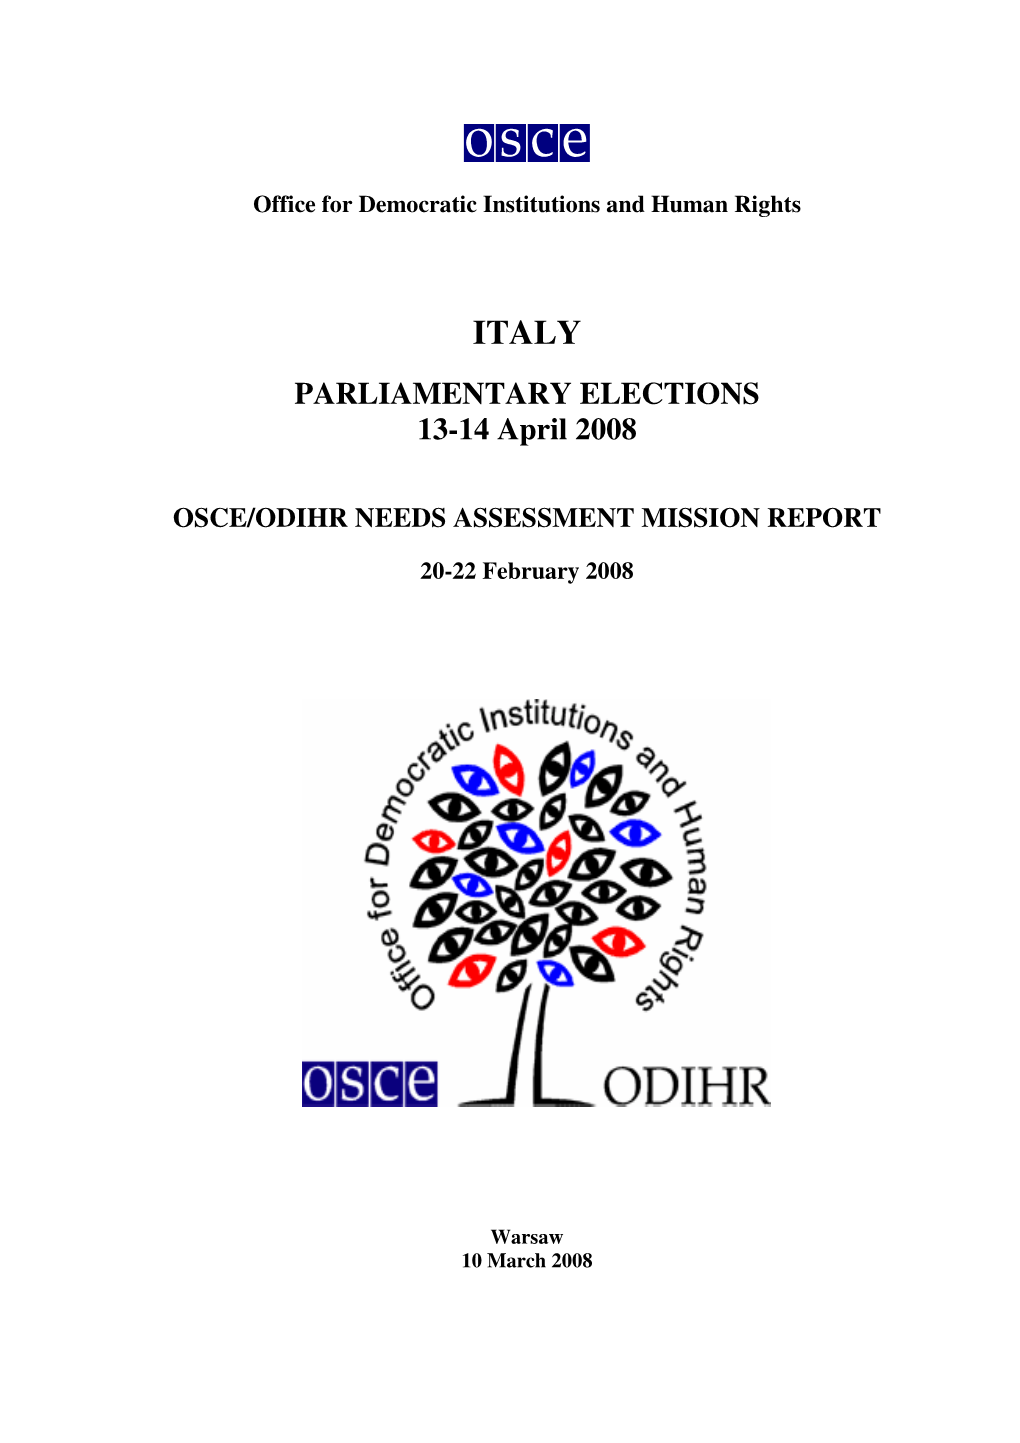 ITALY PARLIAMENTARY ELECTIONS 13-14 April 2008 OSCE/ODIHR